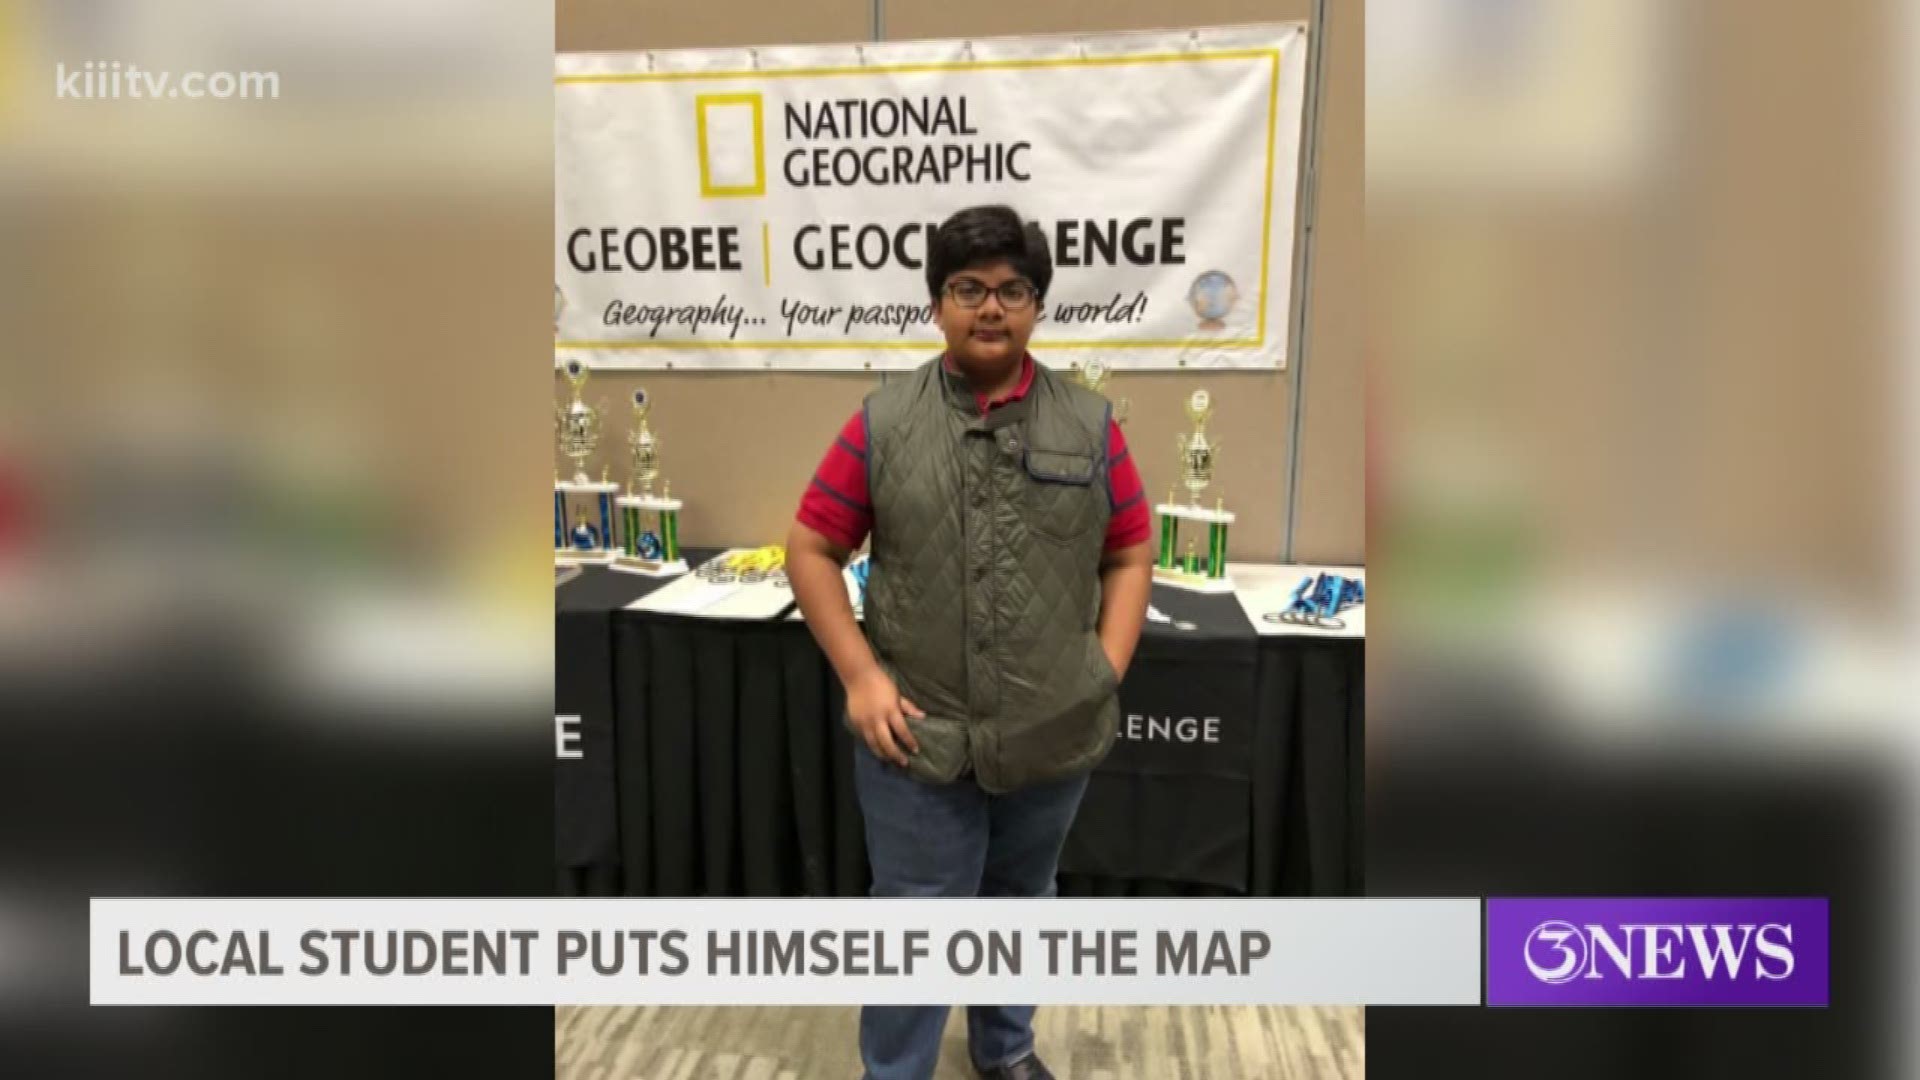 Ashrith Reedy returned from Chicago after taking home first place at a national geography competition after placing fourth in 2018.